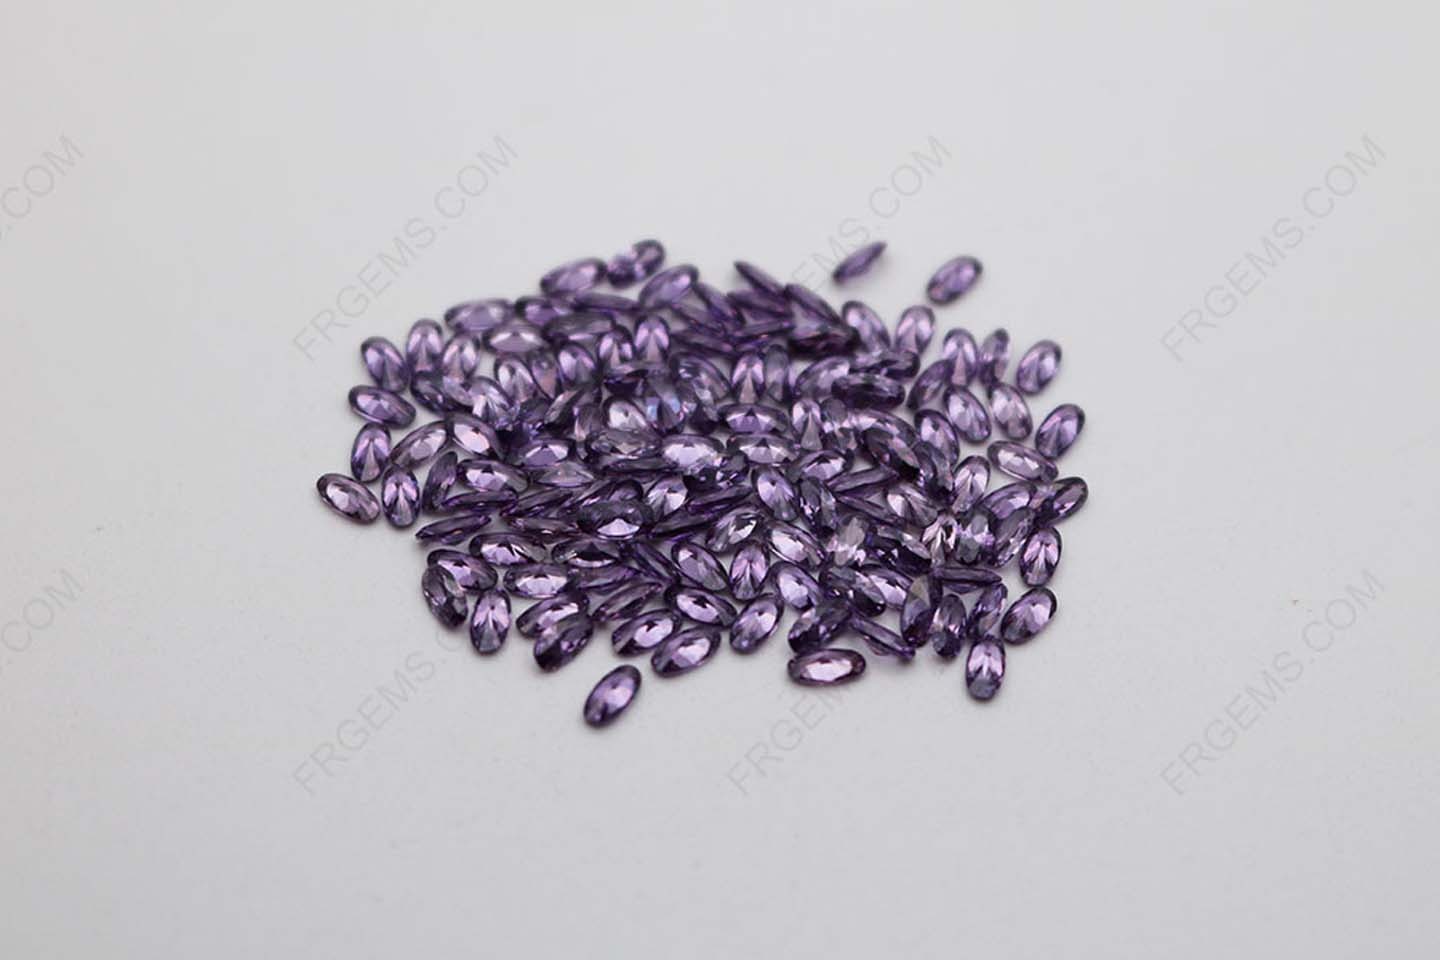 Cubic Zirconia Amethyst Color Oval Shape faceted cut 4x2mm stones CZ10 IMG_1033